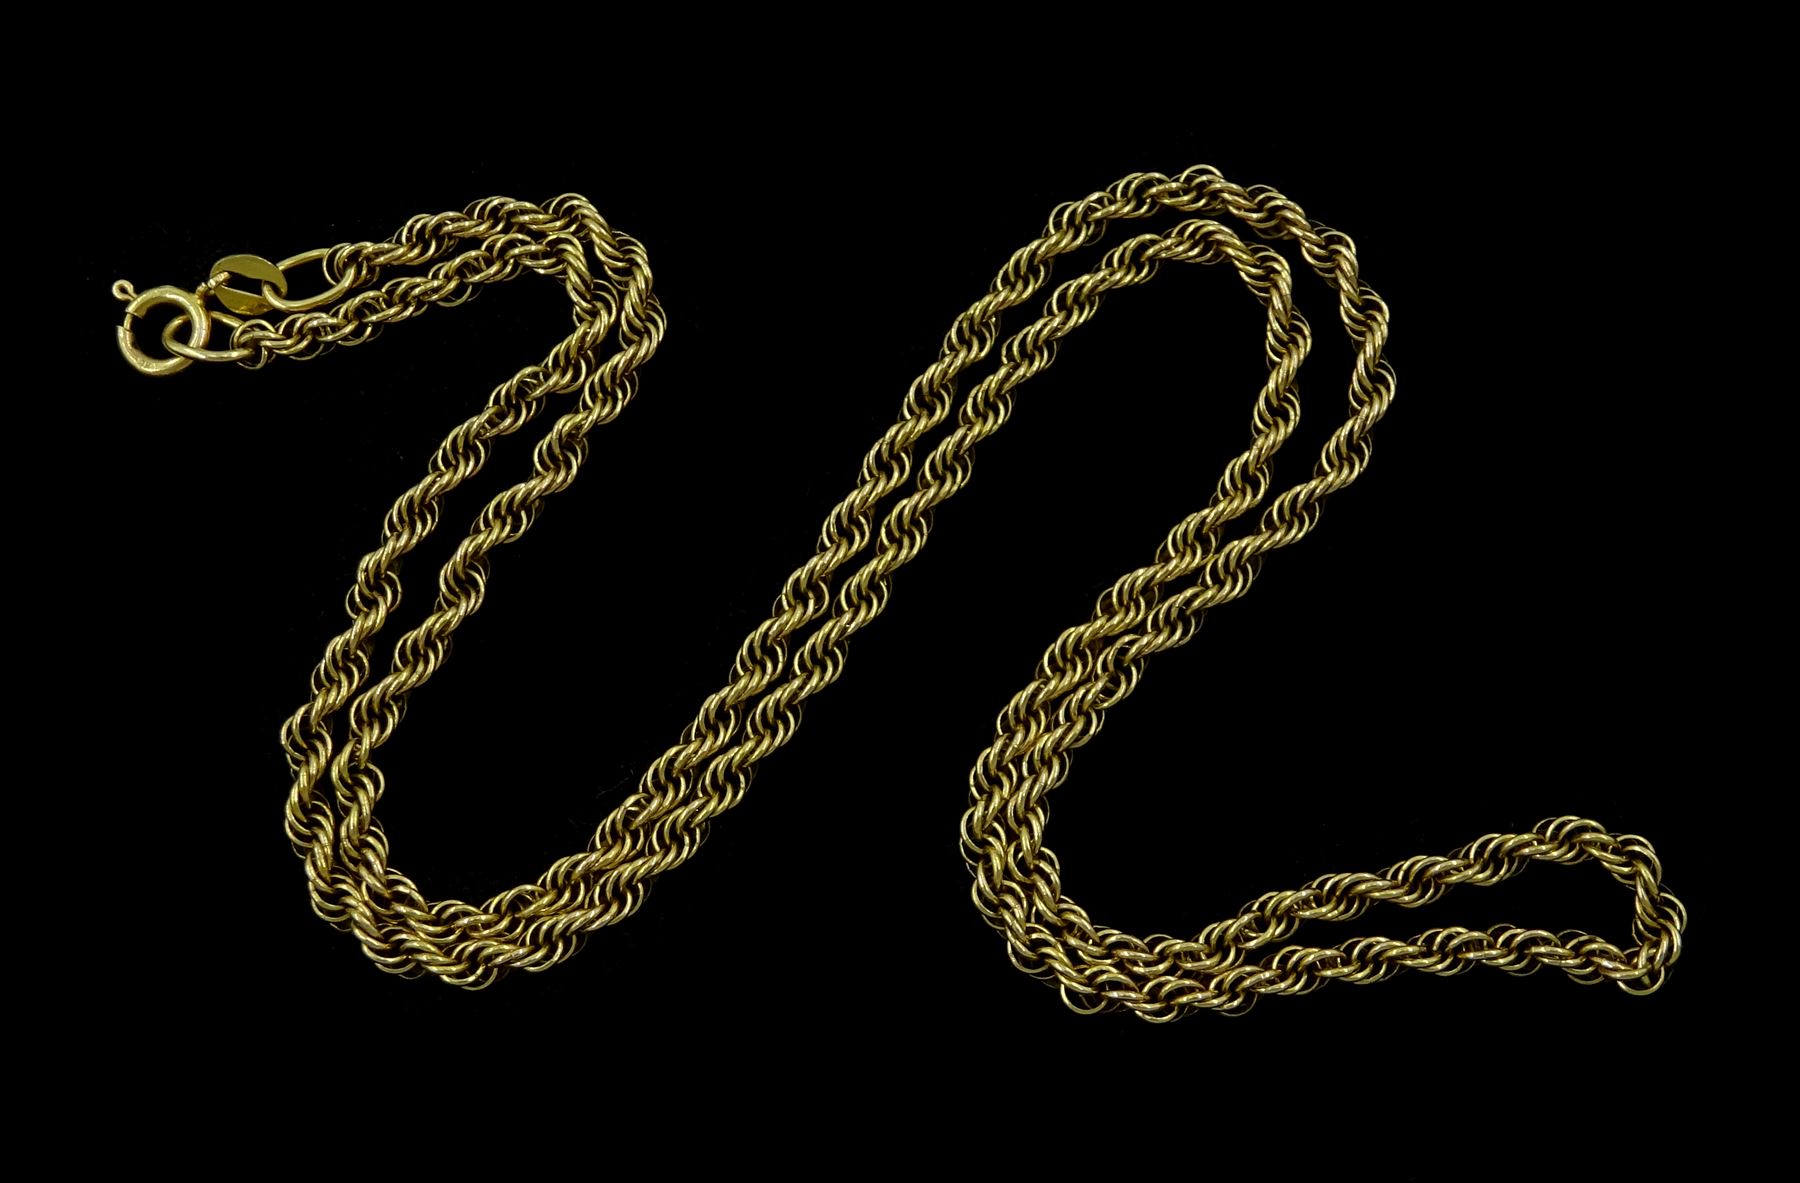 9ct gold rope twist link necklace chain - Image 2 of 2